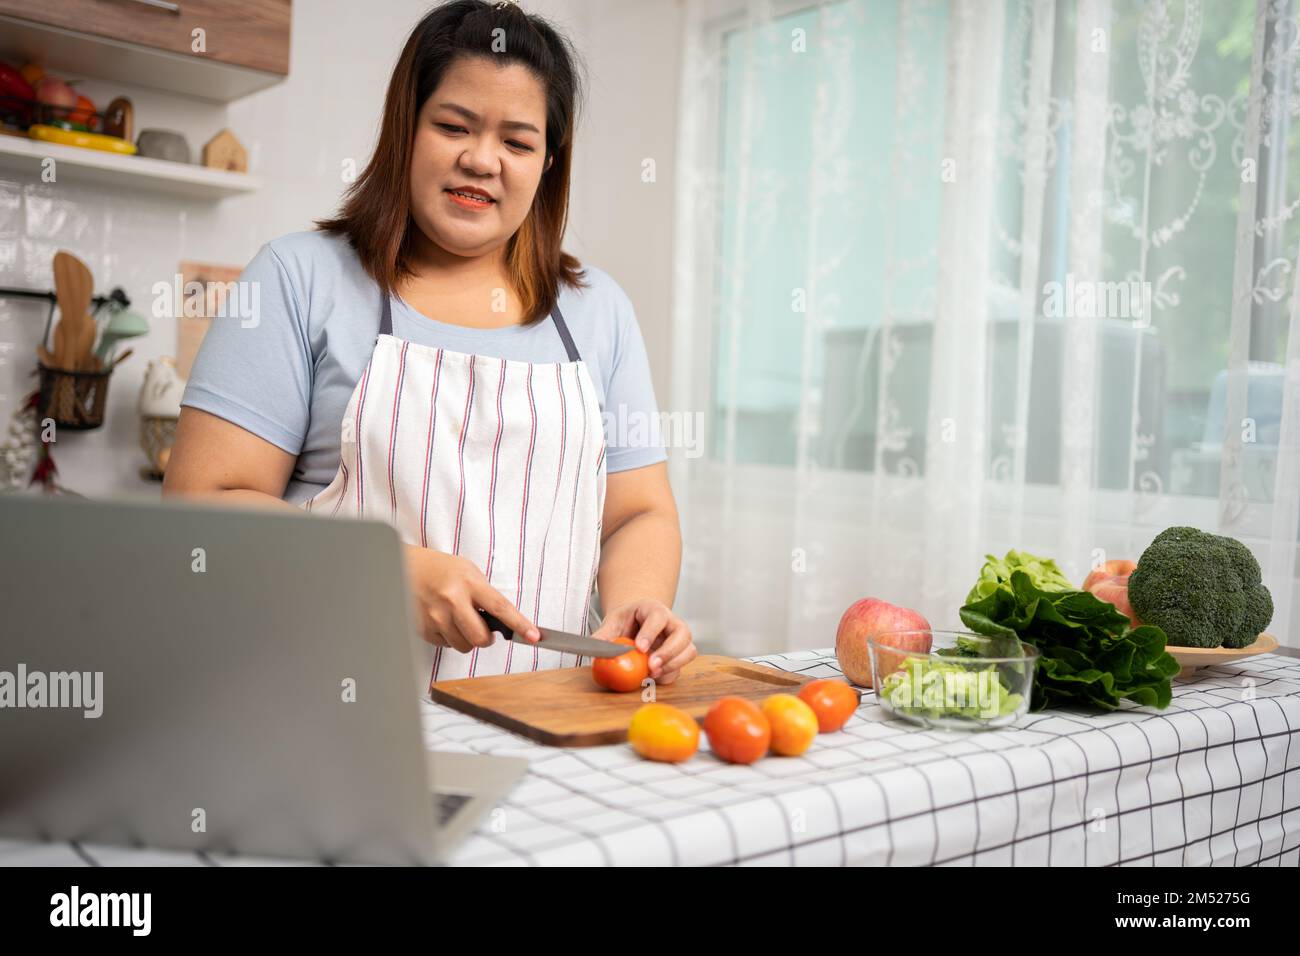 Asian Pregnant learn how to cook healthy meals from the Internet in kitchen, Fat women prepare a vegetable salad for diet food and lose weight. Concep Stock Photo